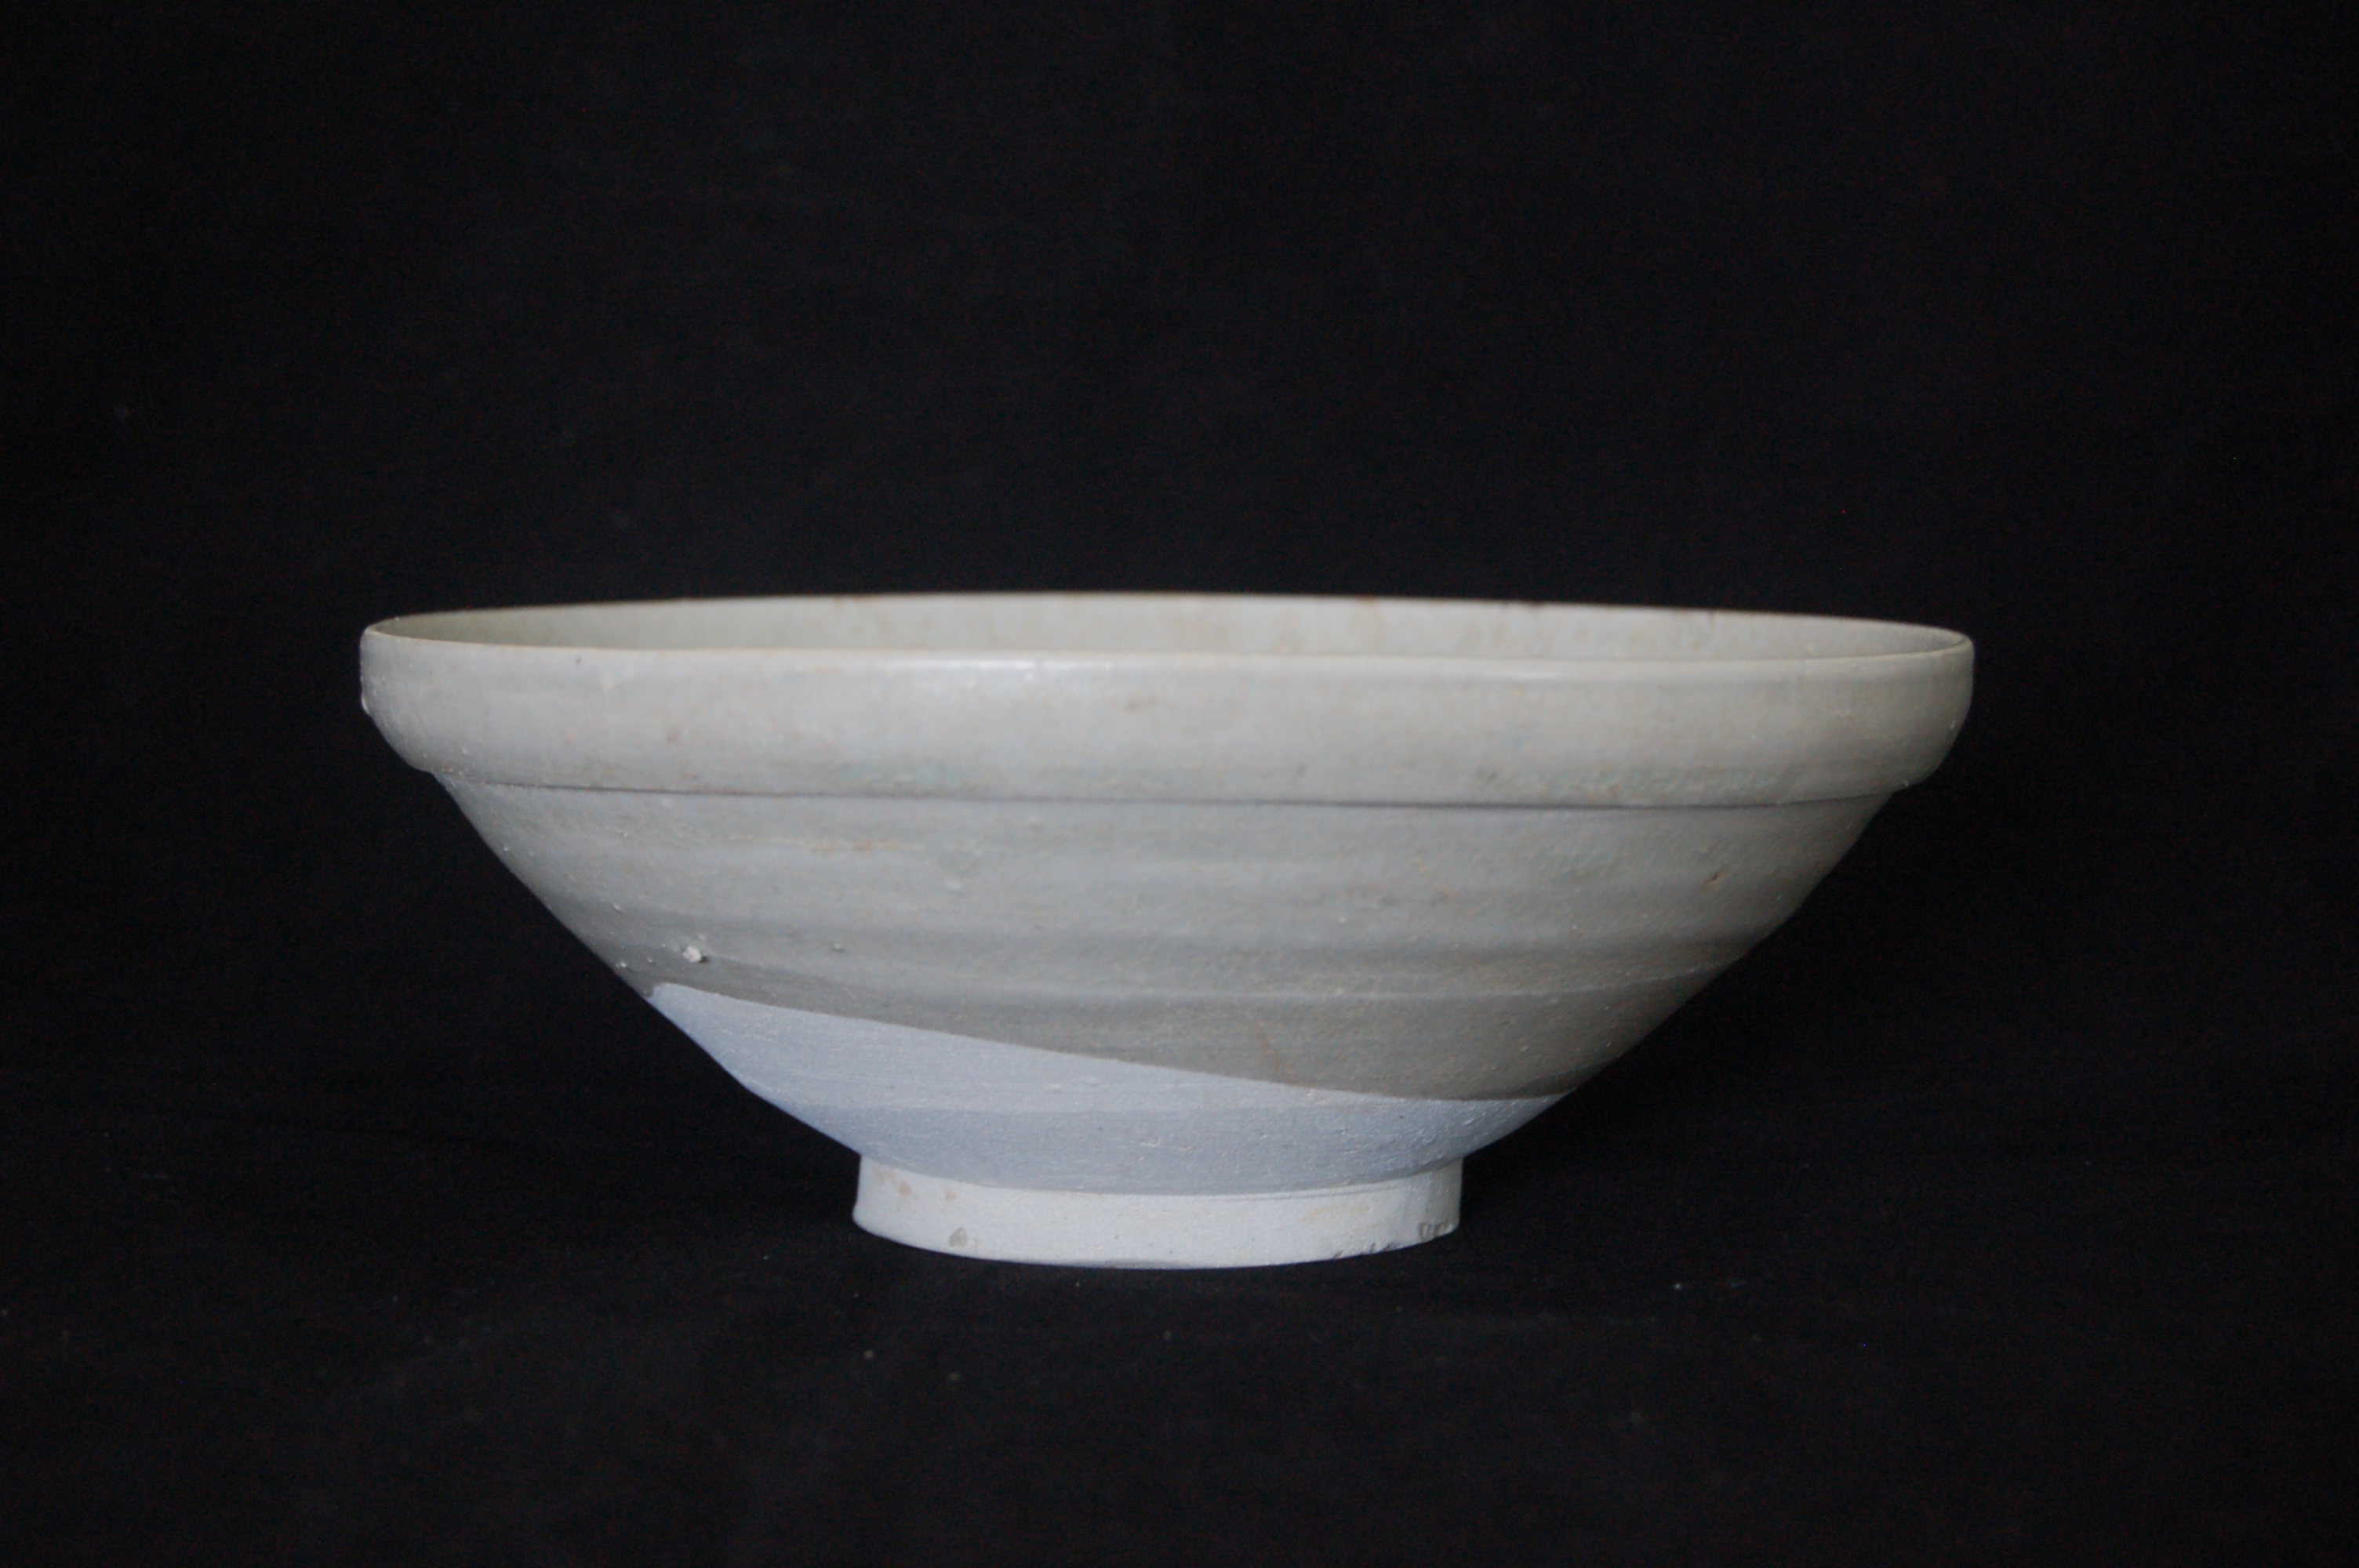 Folded-rim bowl with a slightly rounded wall, an incised ring in the well and a carved foot-ring. Diameter 18 cm, height 7 cm.